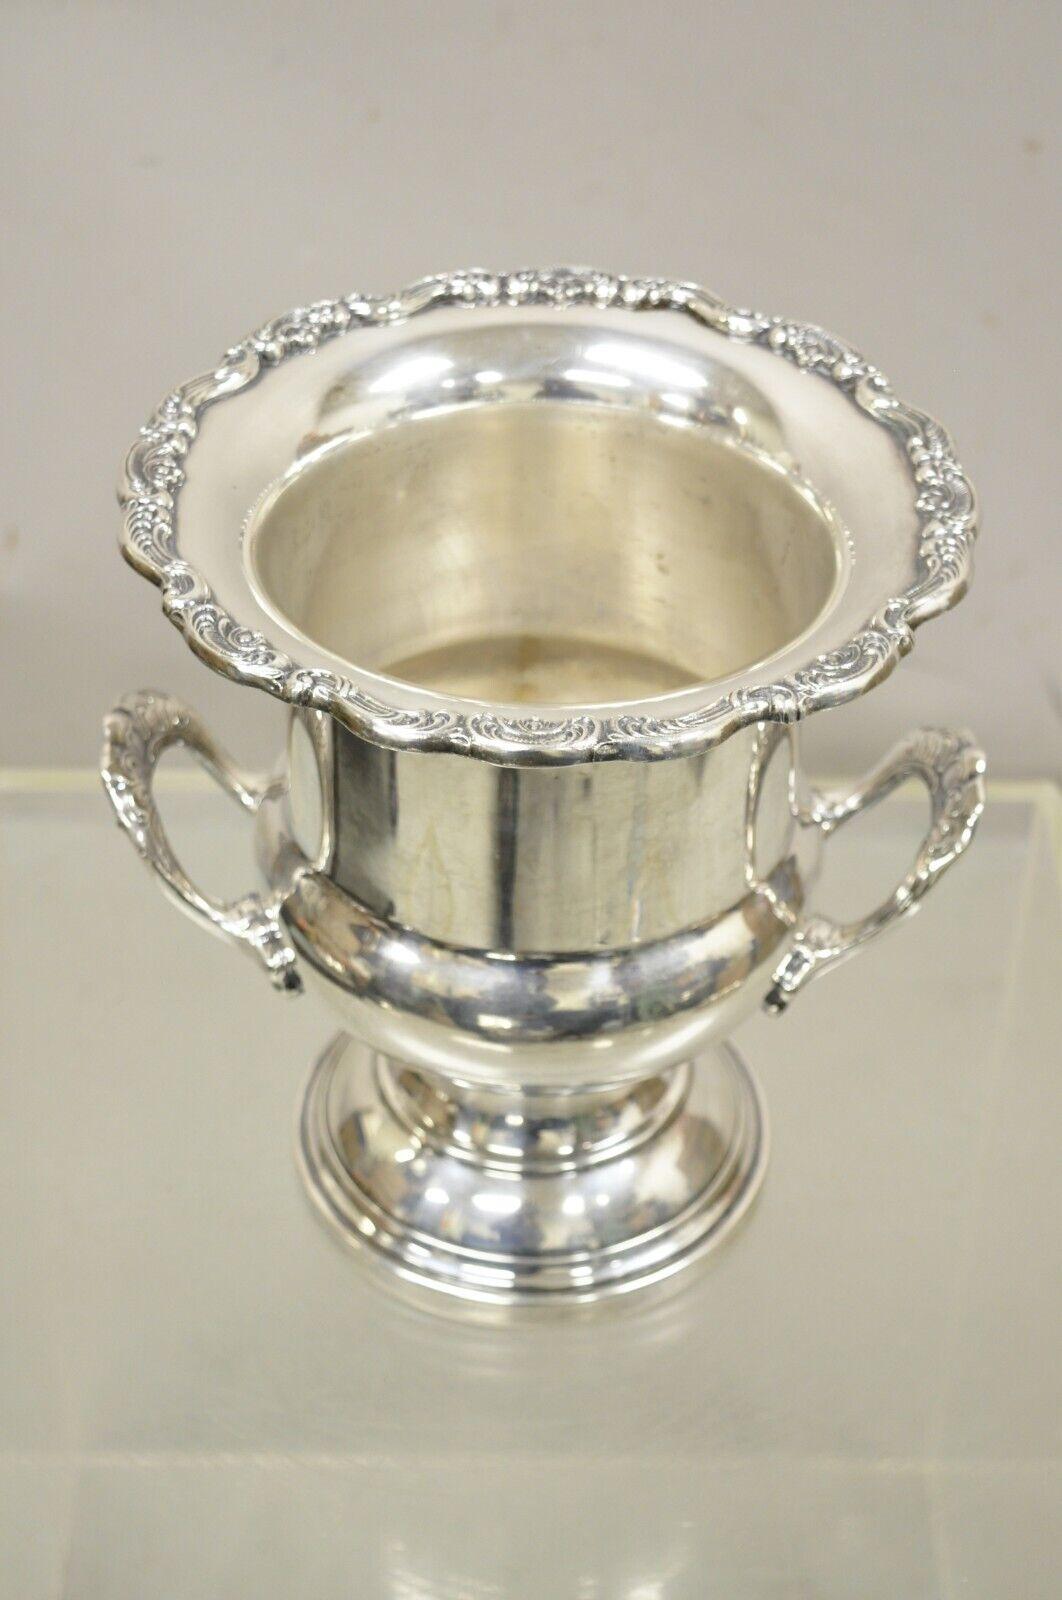 Vintage Gorham Heritage Silver Plated Trophy Cup Champagne Chiller Ice Bucket. Does not include removable interior liner.
Circa  Mid to Late 20th Century. Measurements: 10